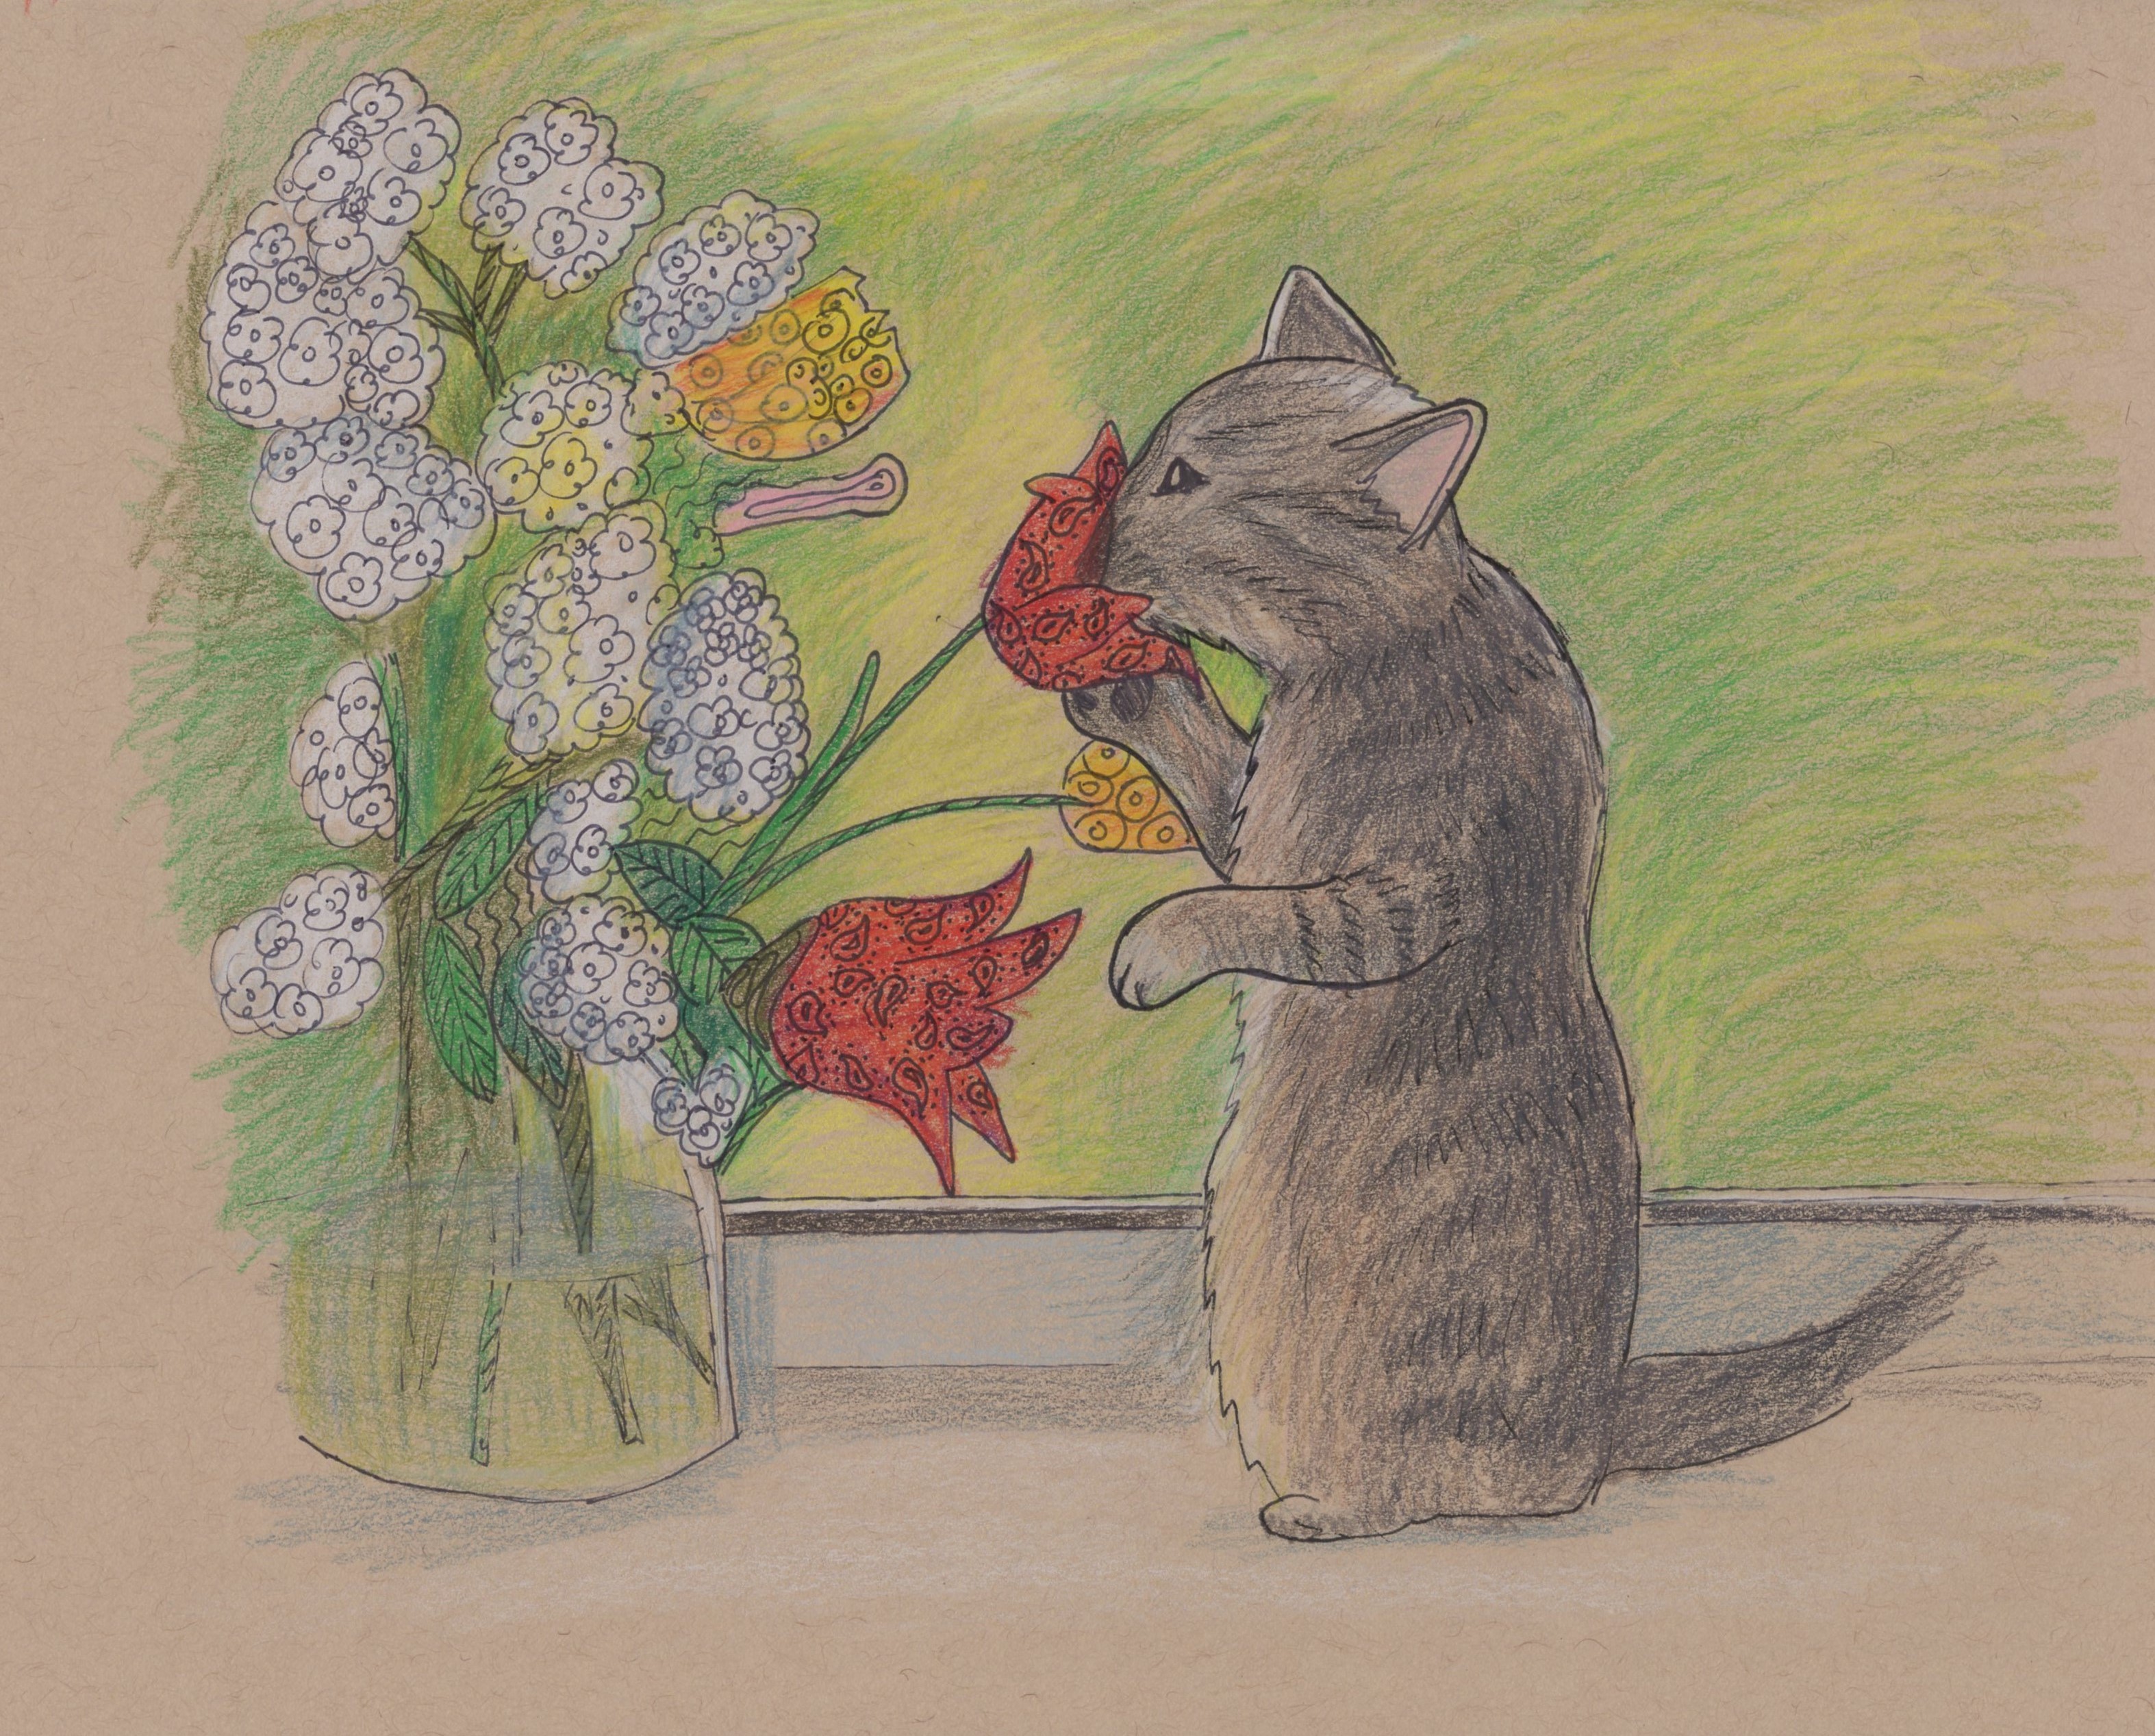 Sketch of kitty sniffing flowers